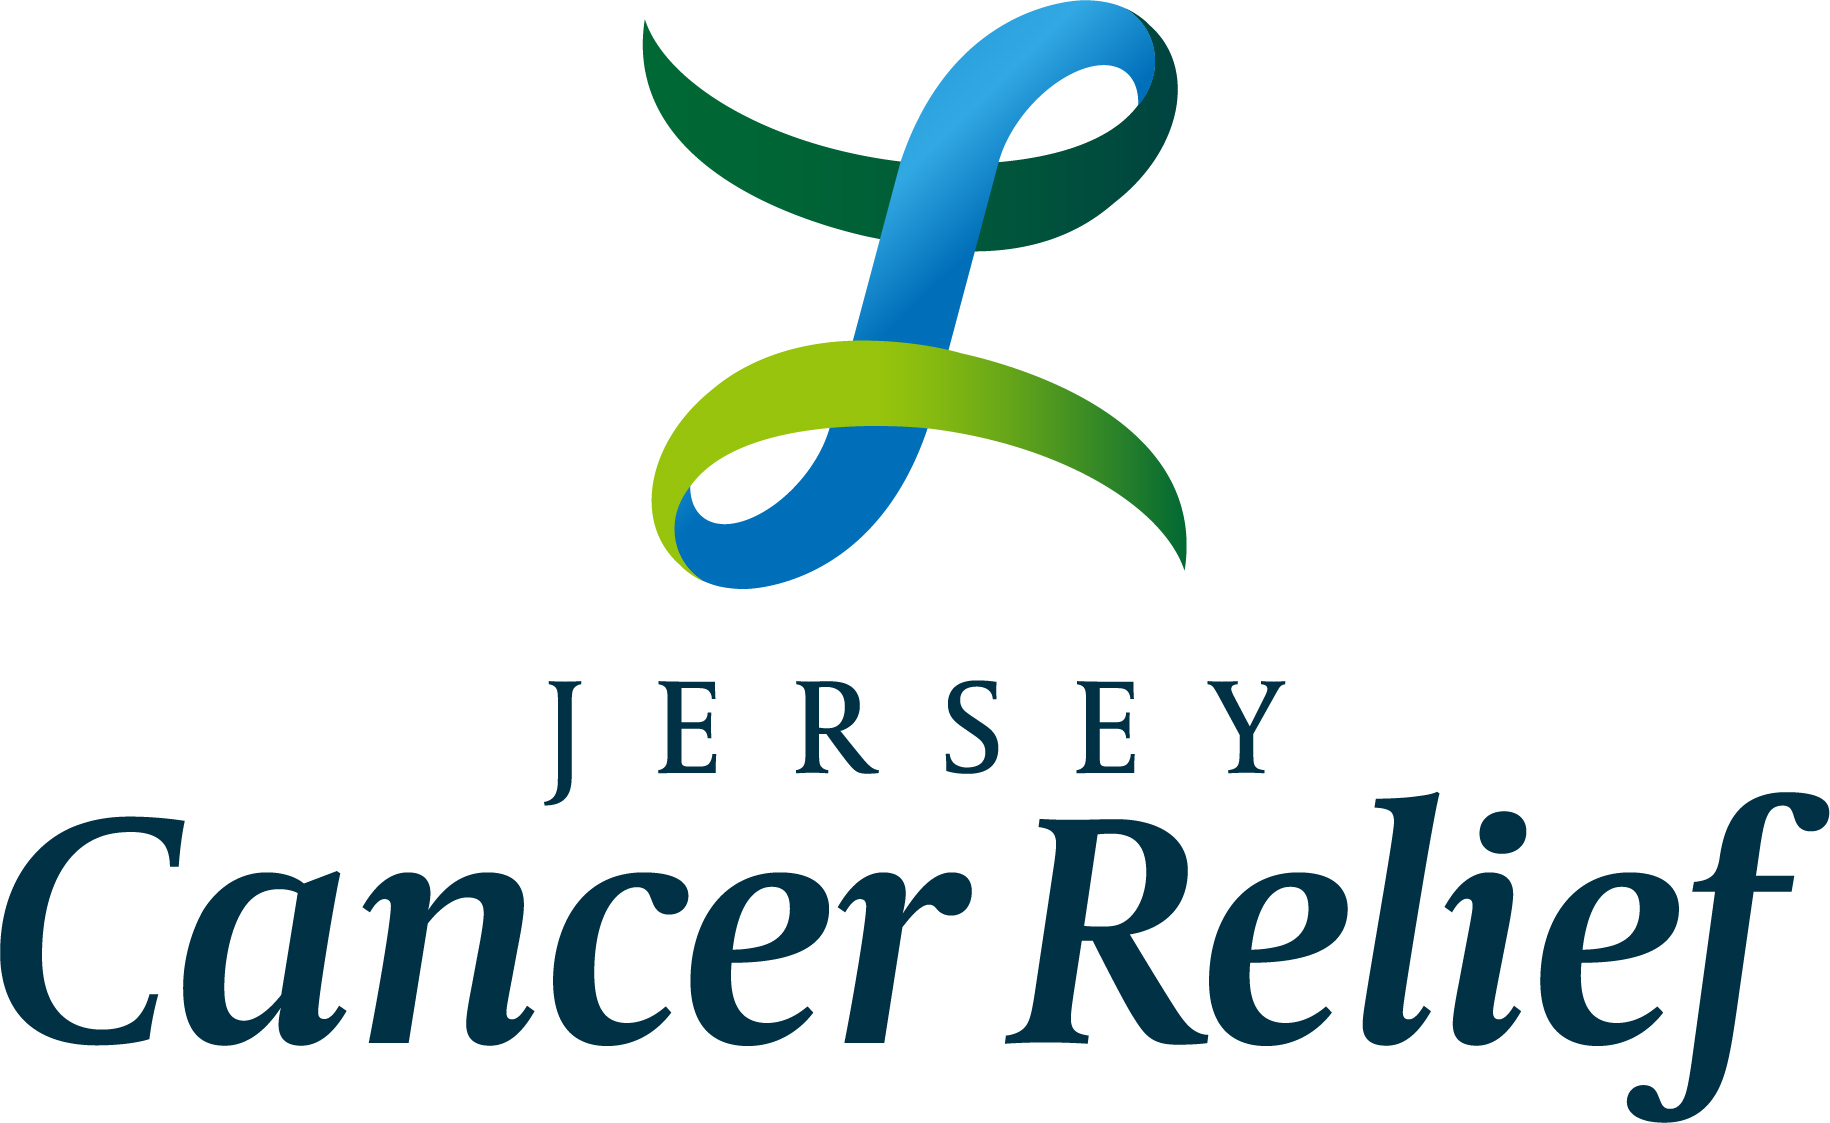 Jersey Cancer Relief